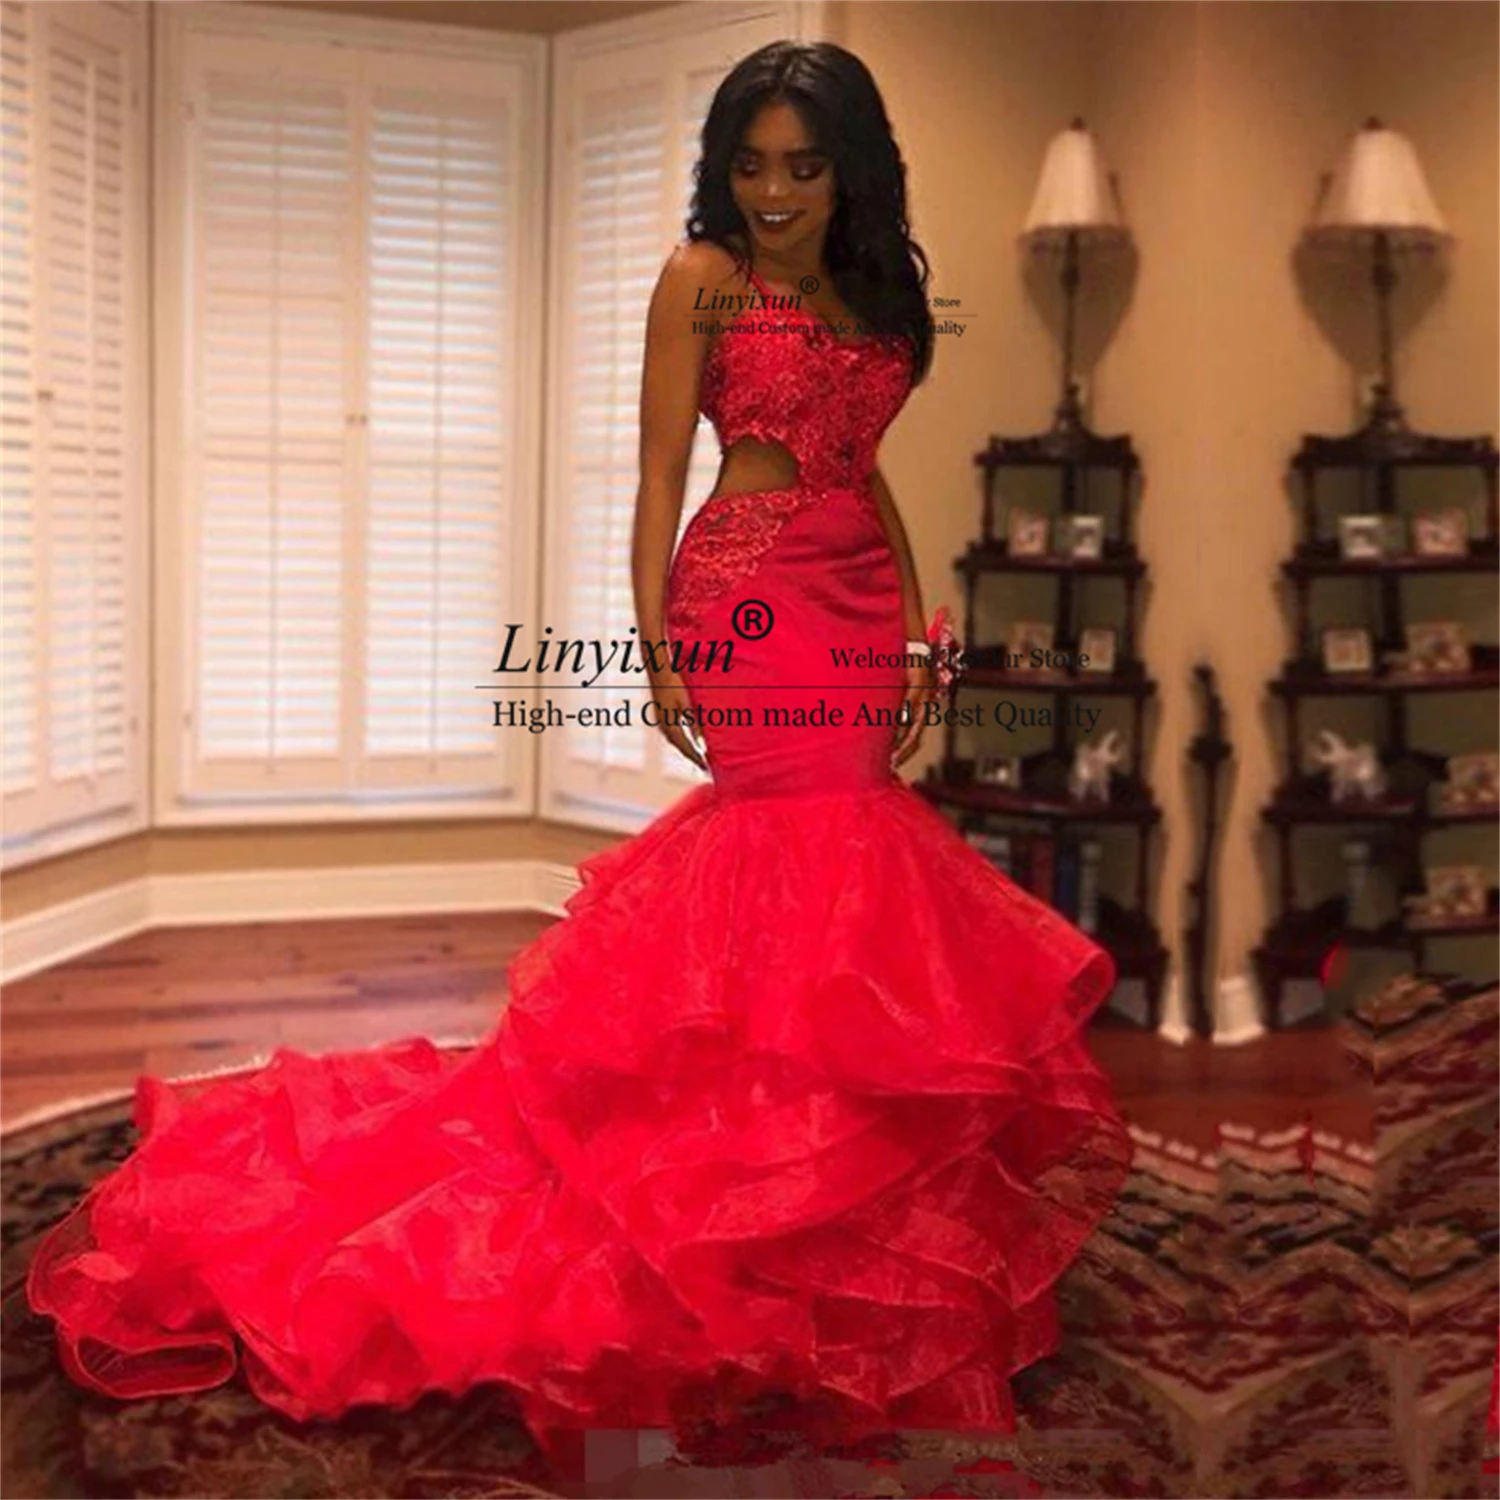 Red Mermaid Prom Dresses 2022 Spaghetti Strap Sweetheart Appliques Evening Party Gowns Sleeveless Court Train robes de soirée long prom dresses